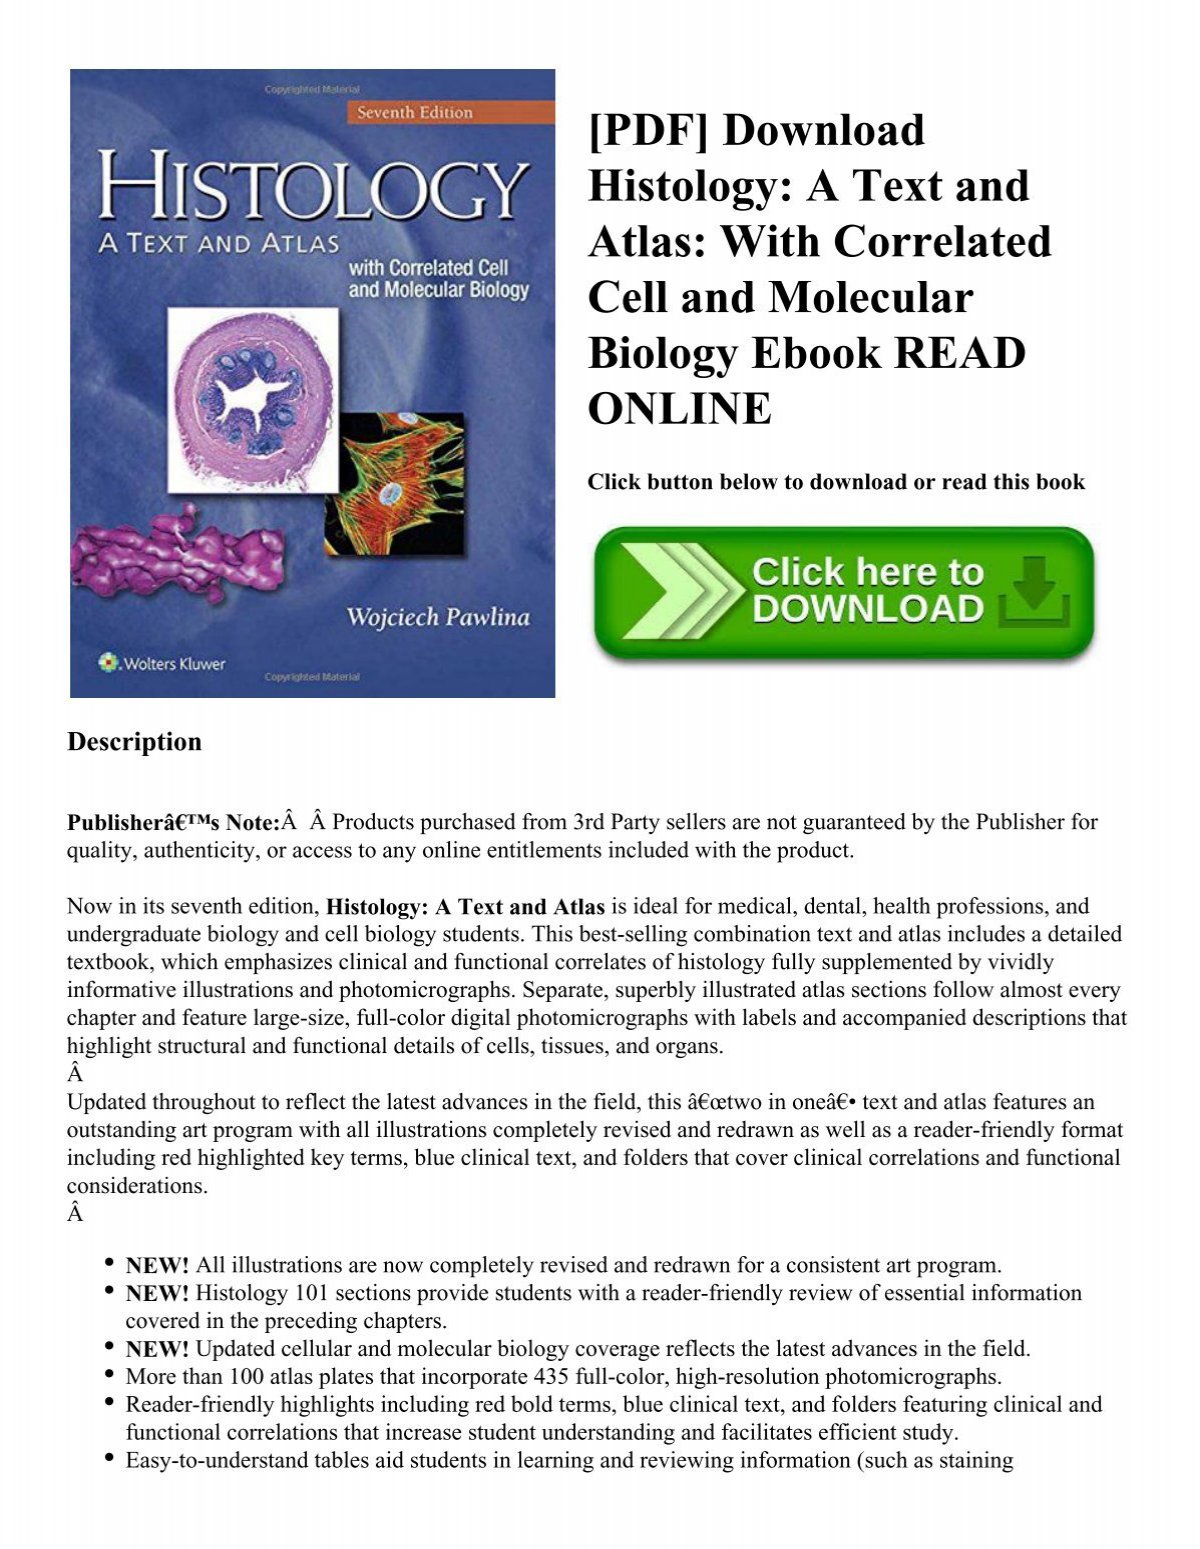 Download Pdf Download Histology A Text And Atlas With Correlated Cell And Molecular Biology Ebook Read Online